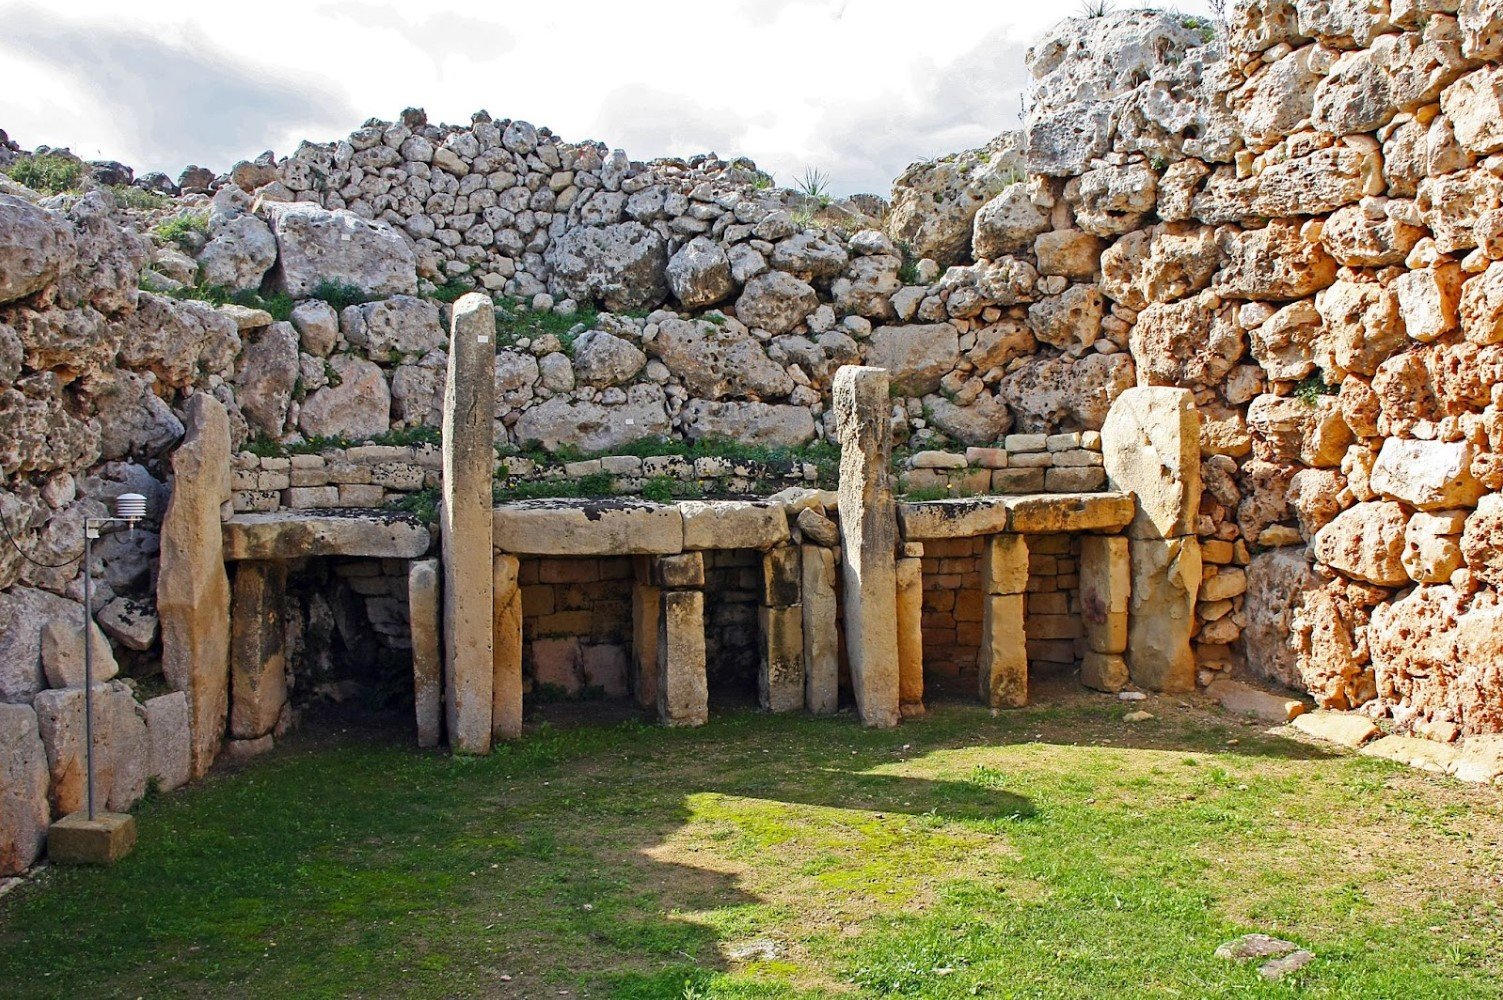 An image of one of the large structures at Malta’s Neolithic Ġgantija Temples